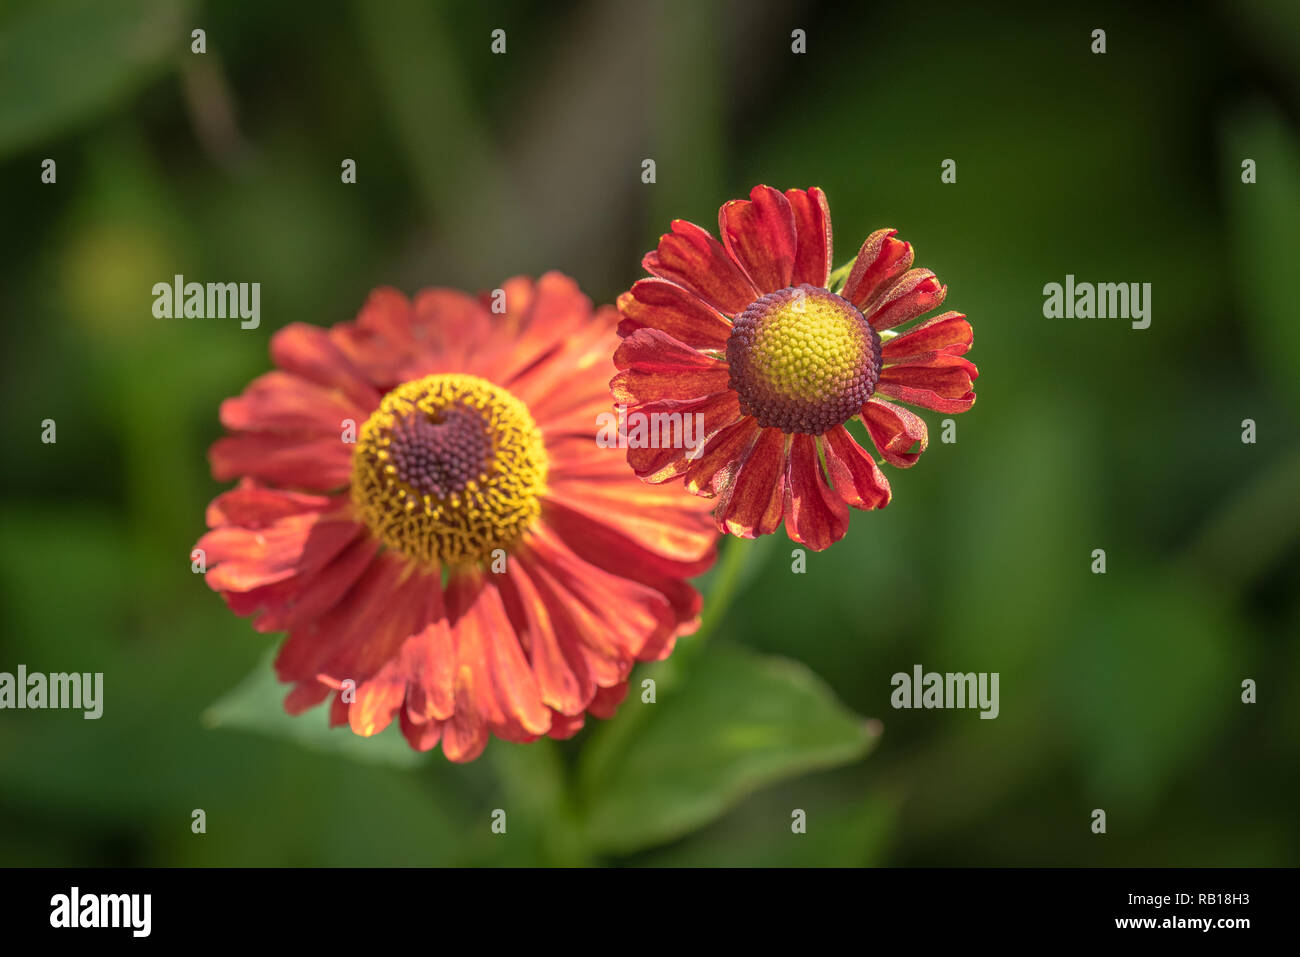 Natural floral colorful outdoor macro of a pair of isolated wide open yellow red helenium/bride of the sun blossoms,blurred green backgroumd,sunny day Stock Photo